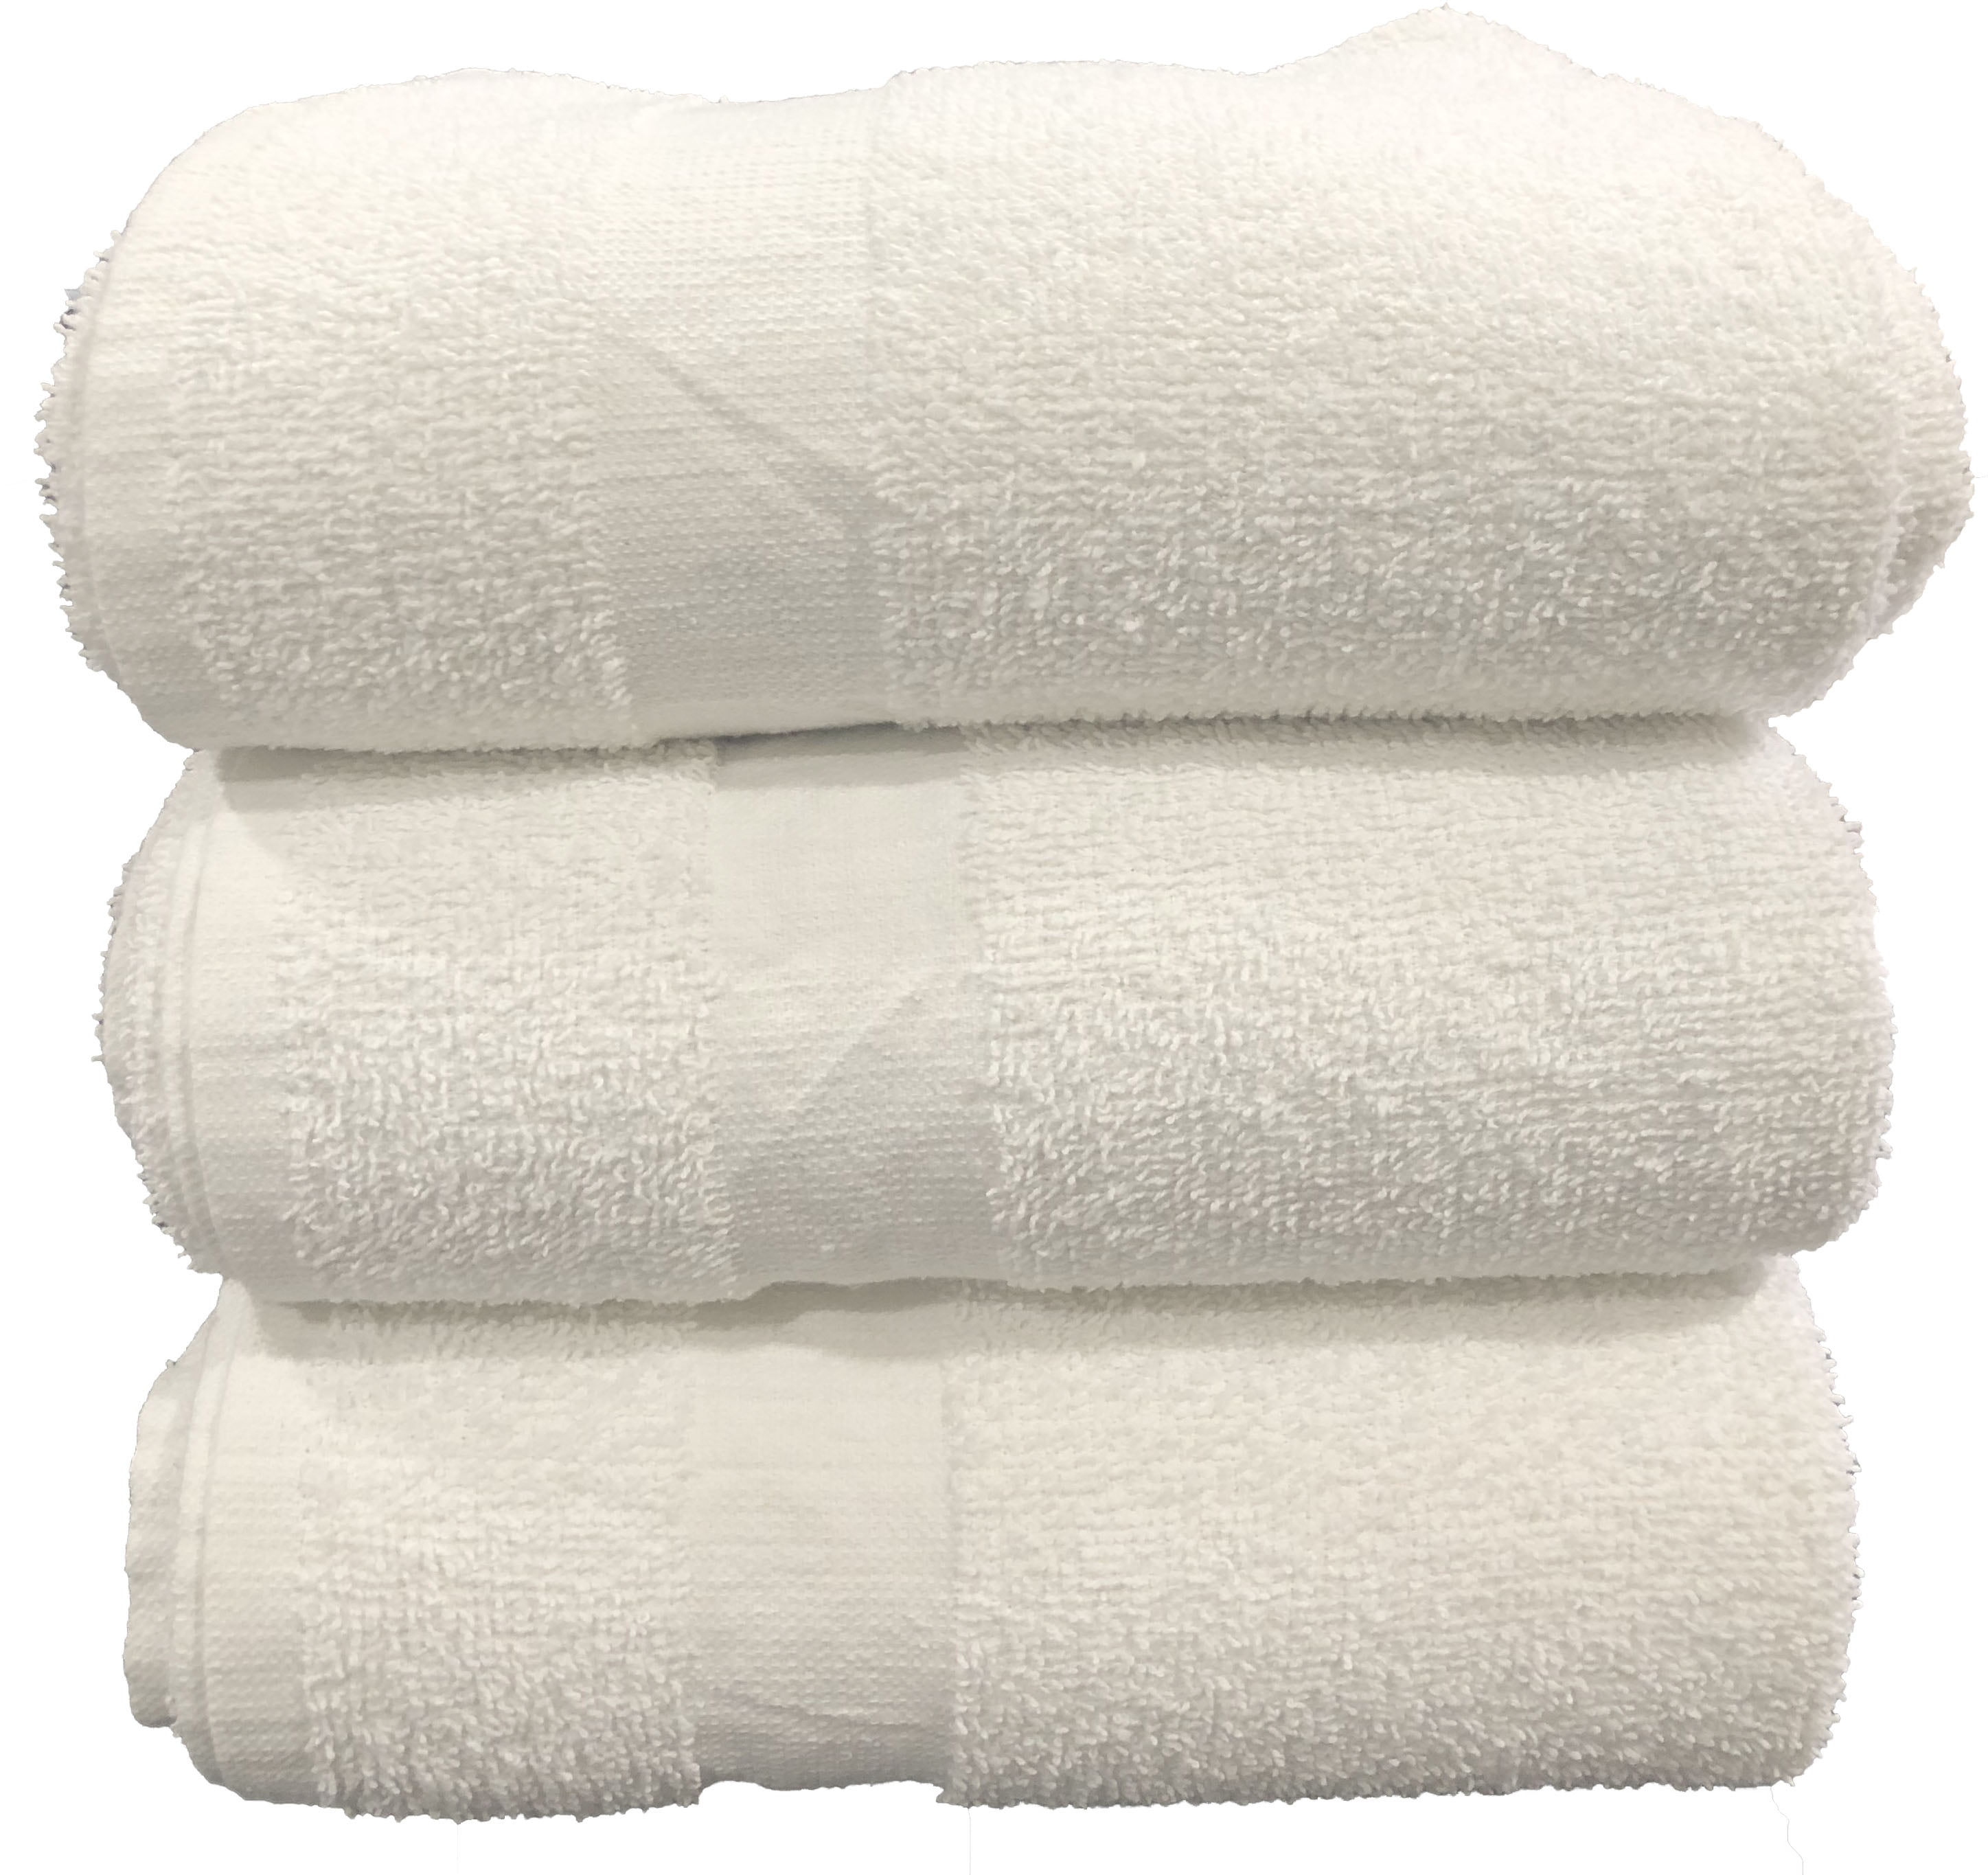 24 new economy bath towels utility grade 22x44 100% cotton home collection 